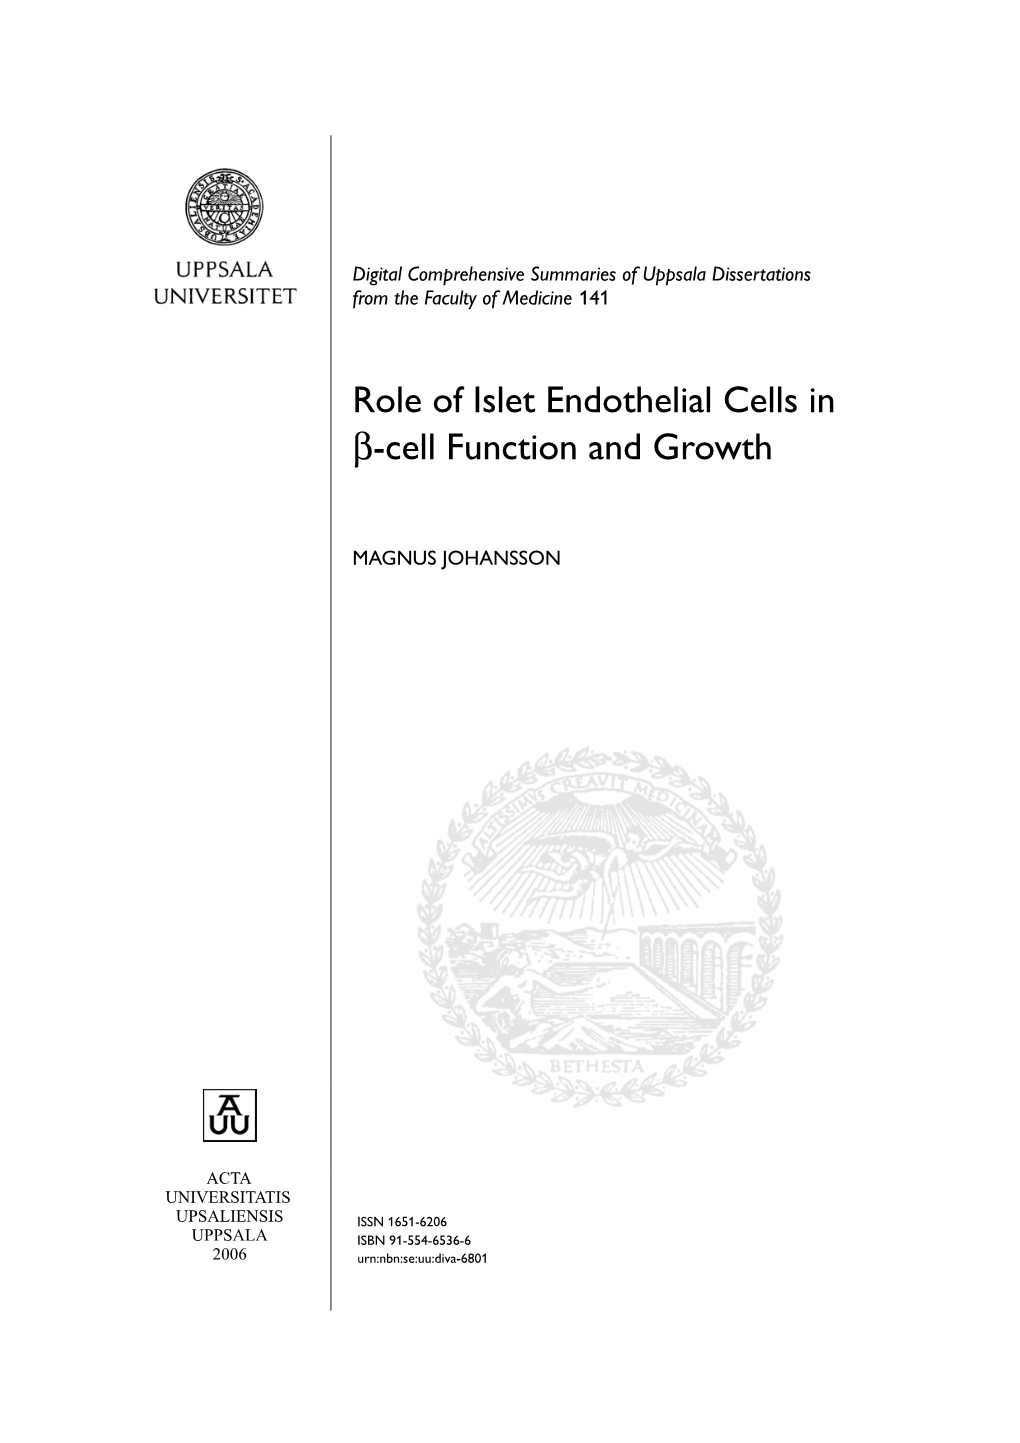 Role of Islet Endothelial Cells in Β-Cell Function and Growth